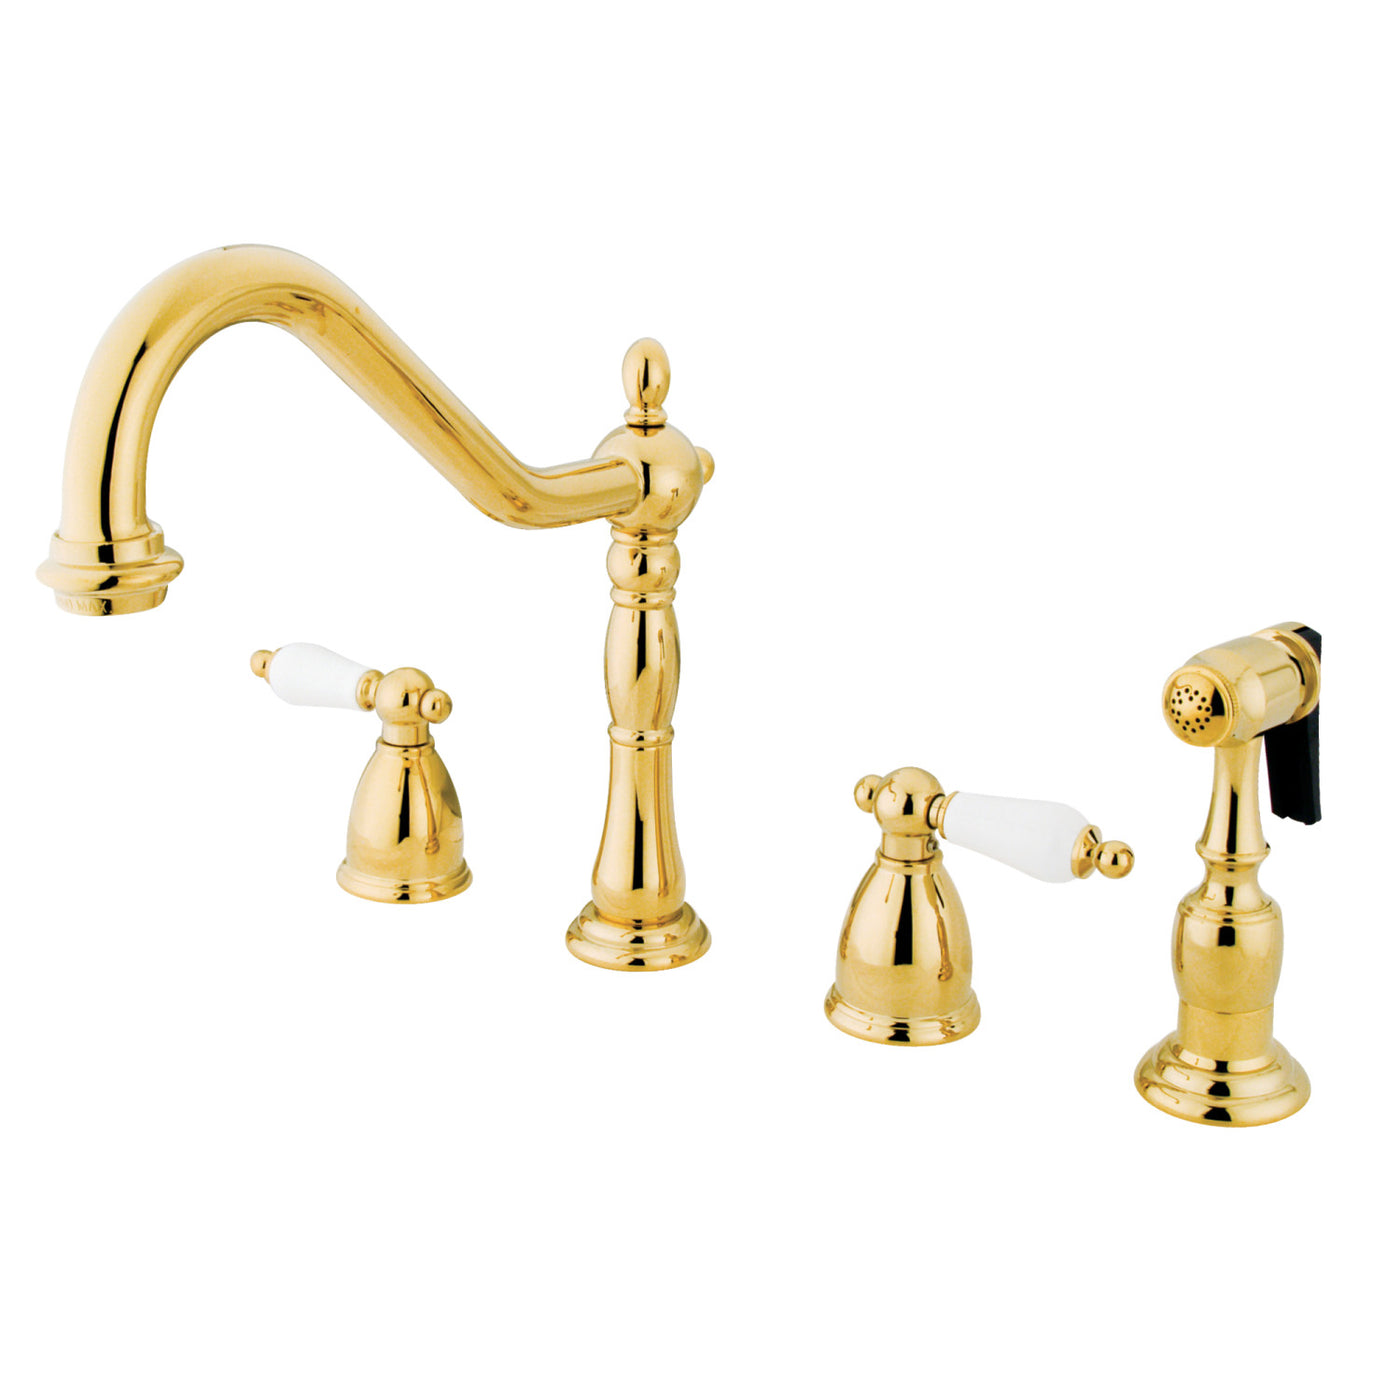 Elements of Design EB1792PLBS Widespread Kitchen Faucet with Brass Sprayer, Polished Brass